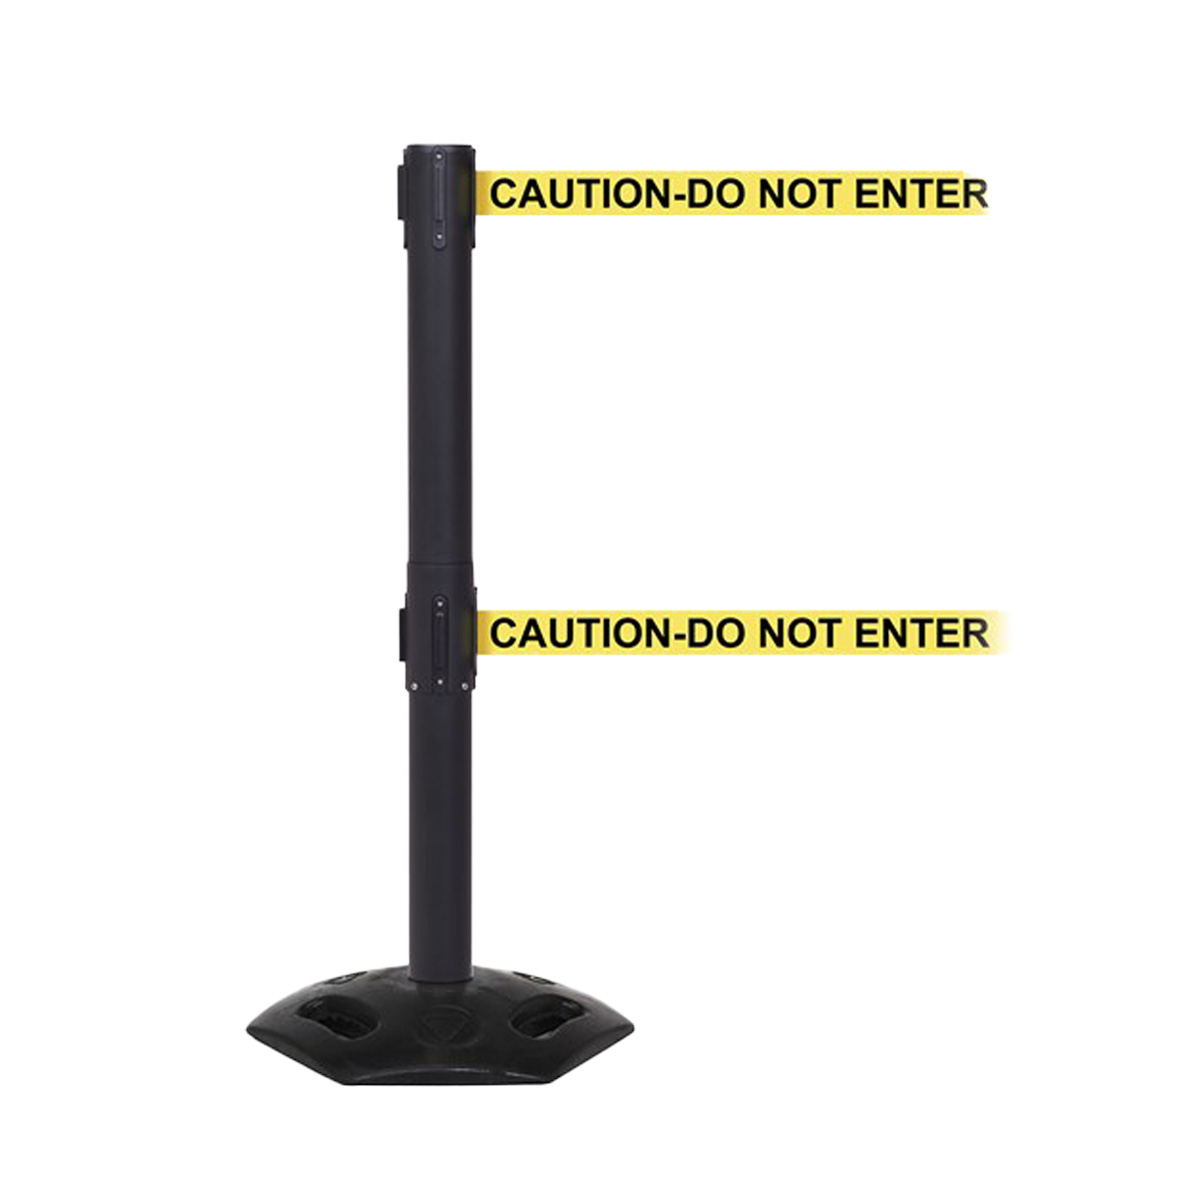 WeatherMaster Twin Outdoor Retractable Barriers Are Available With Seven Pre-Printed Safety Messages